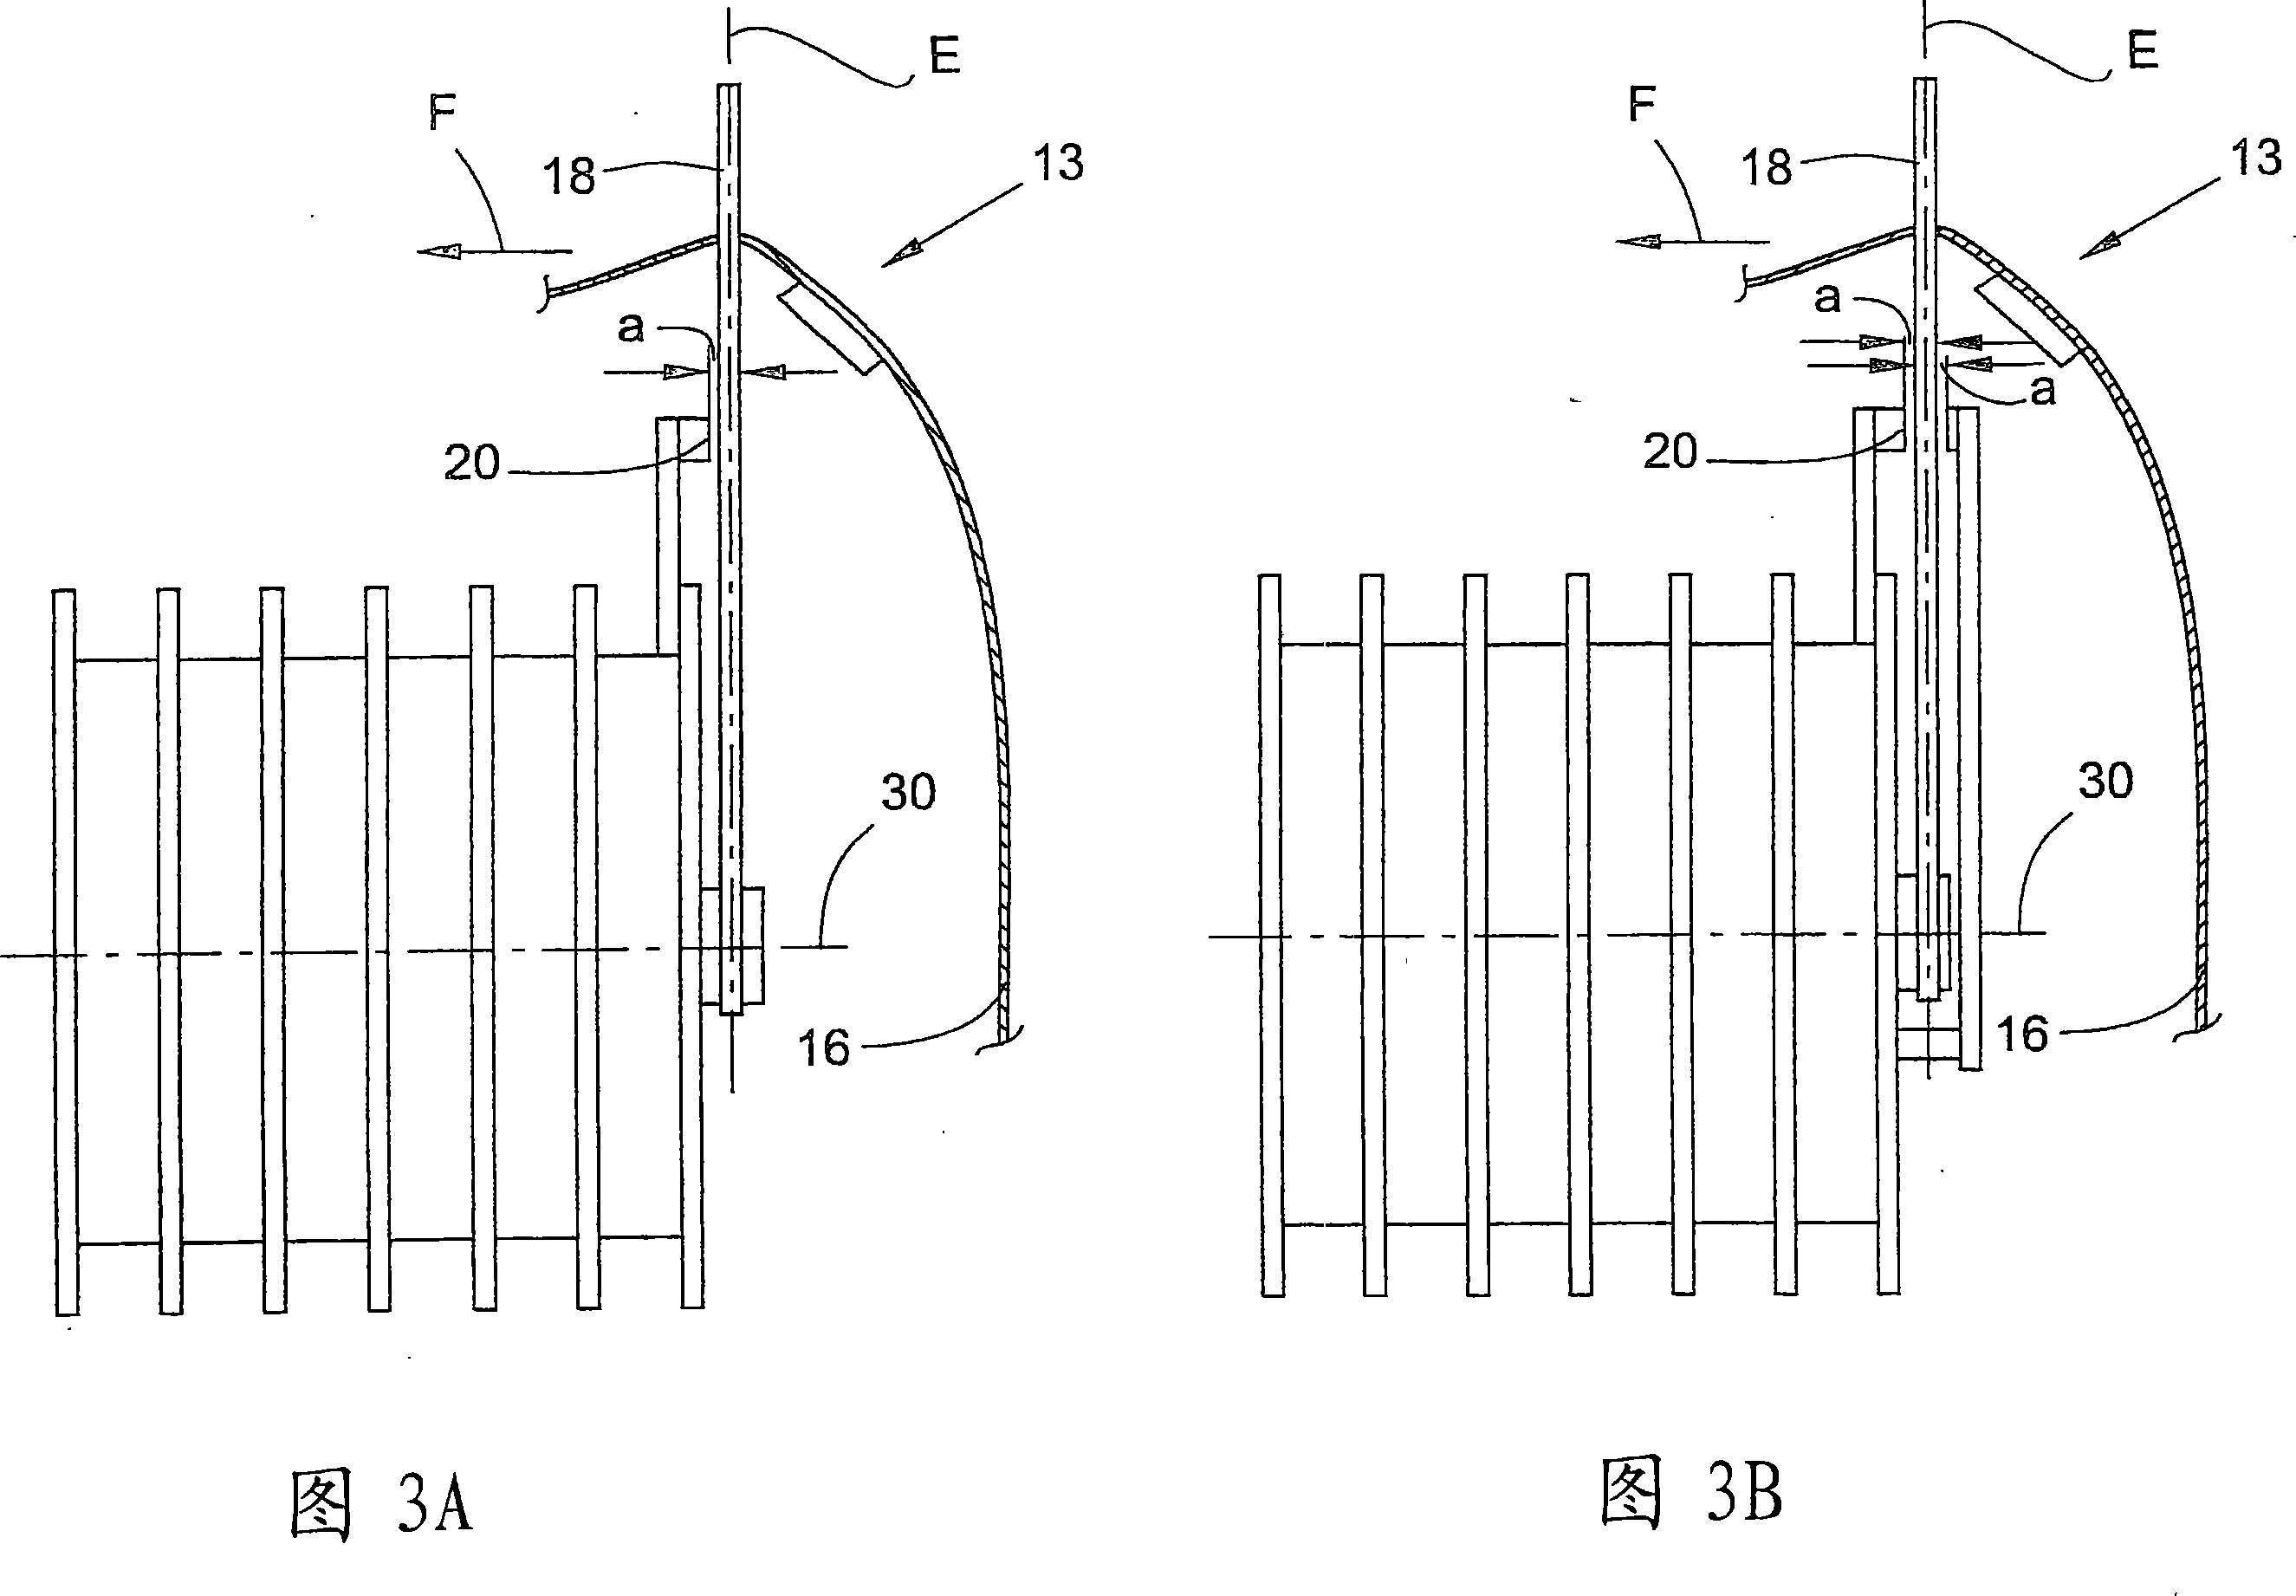 Thread traversing device for a winding device in a textile machine producing crosswound bobbins